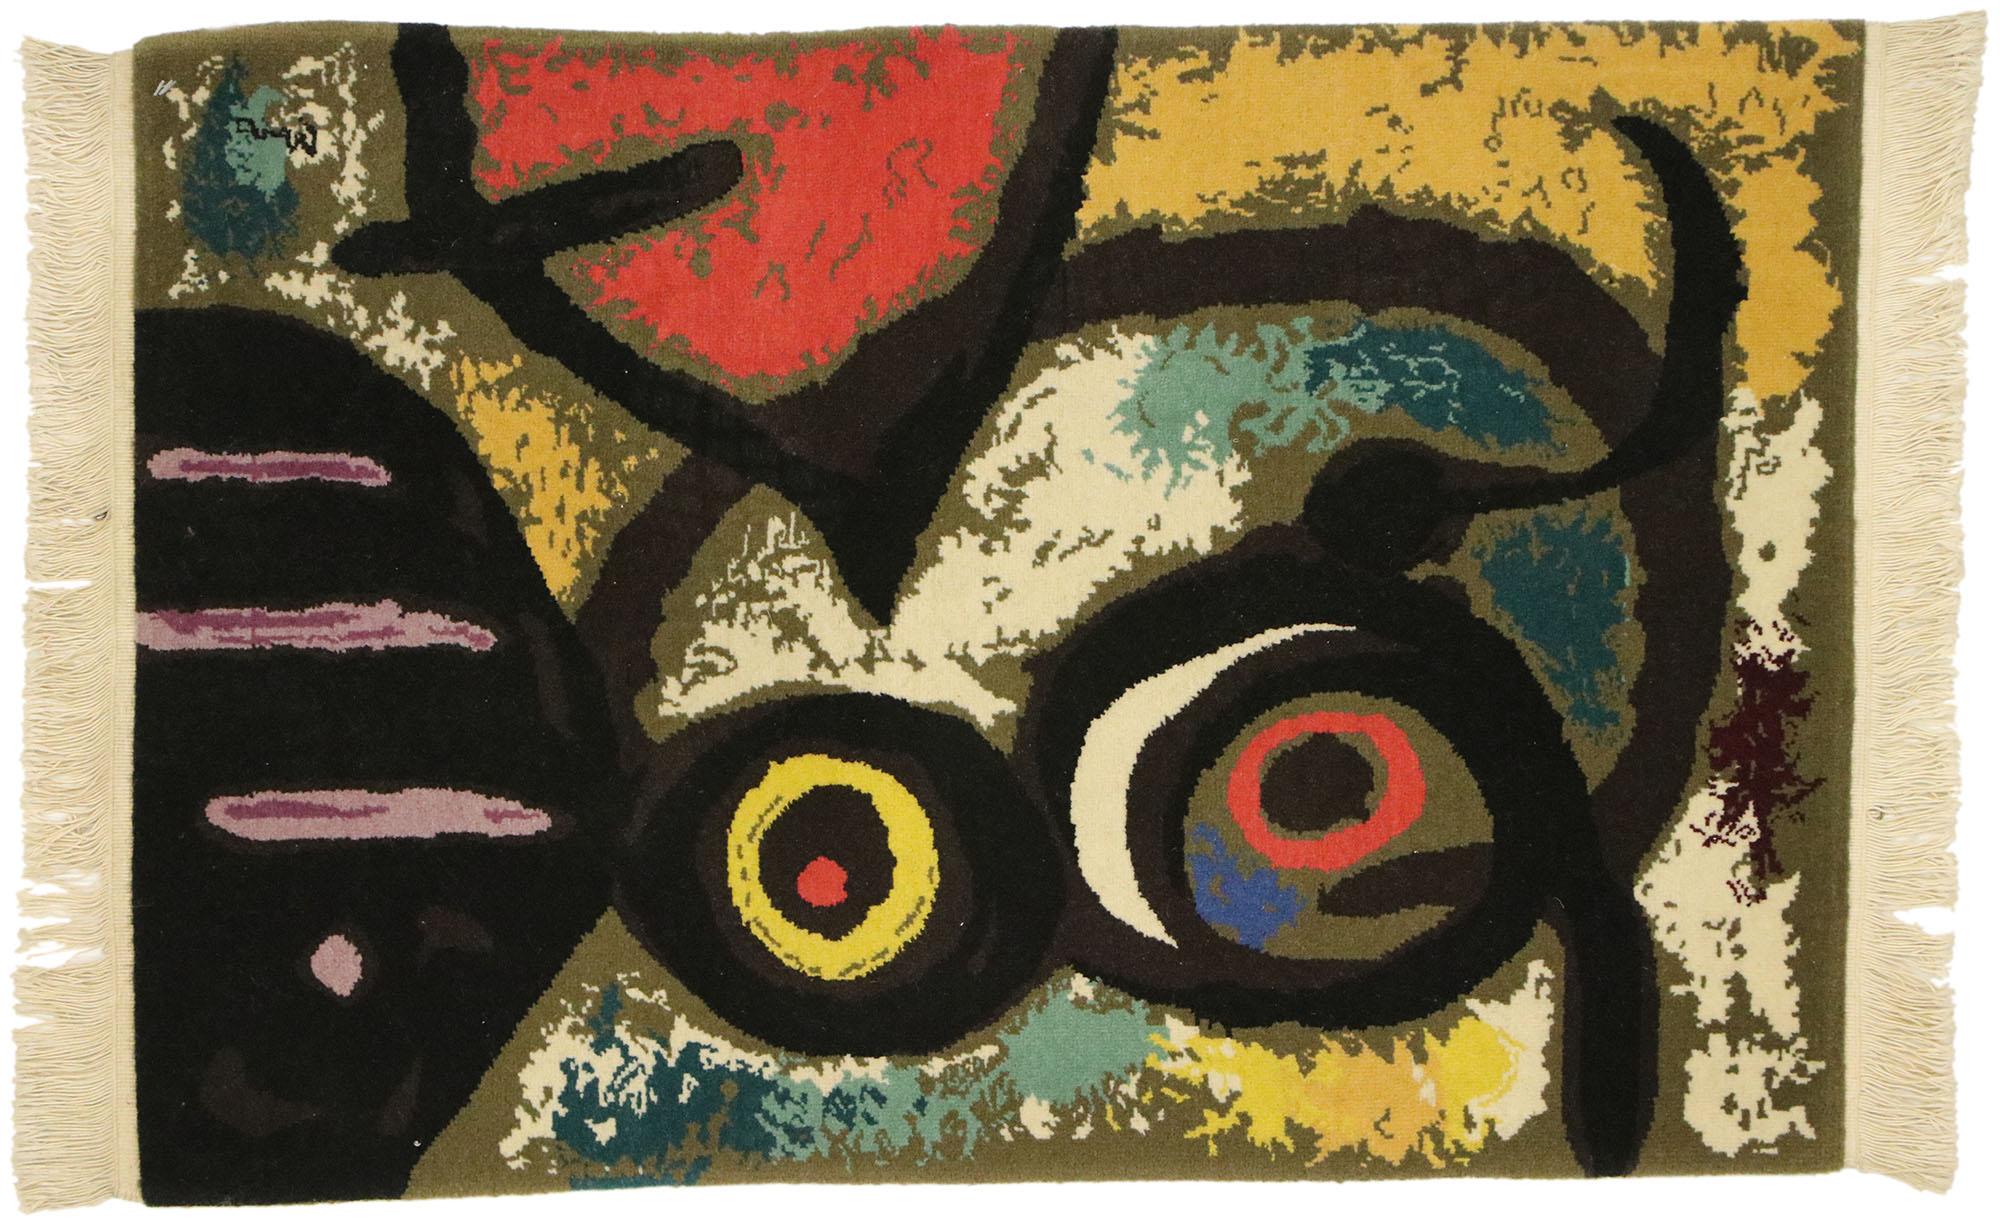 77101, a surrealist style tapestry after Joan Miro's 'Femme et Oiseaux' Woman and Birds, 1966. The painting was the last of a series the artist completed in Barcelona just after the Nazi occupation of France. Miro used his painted to escape from the